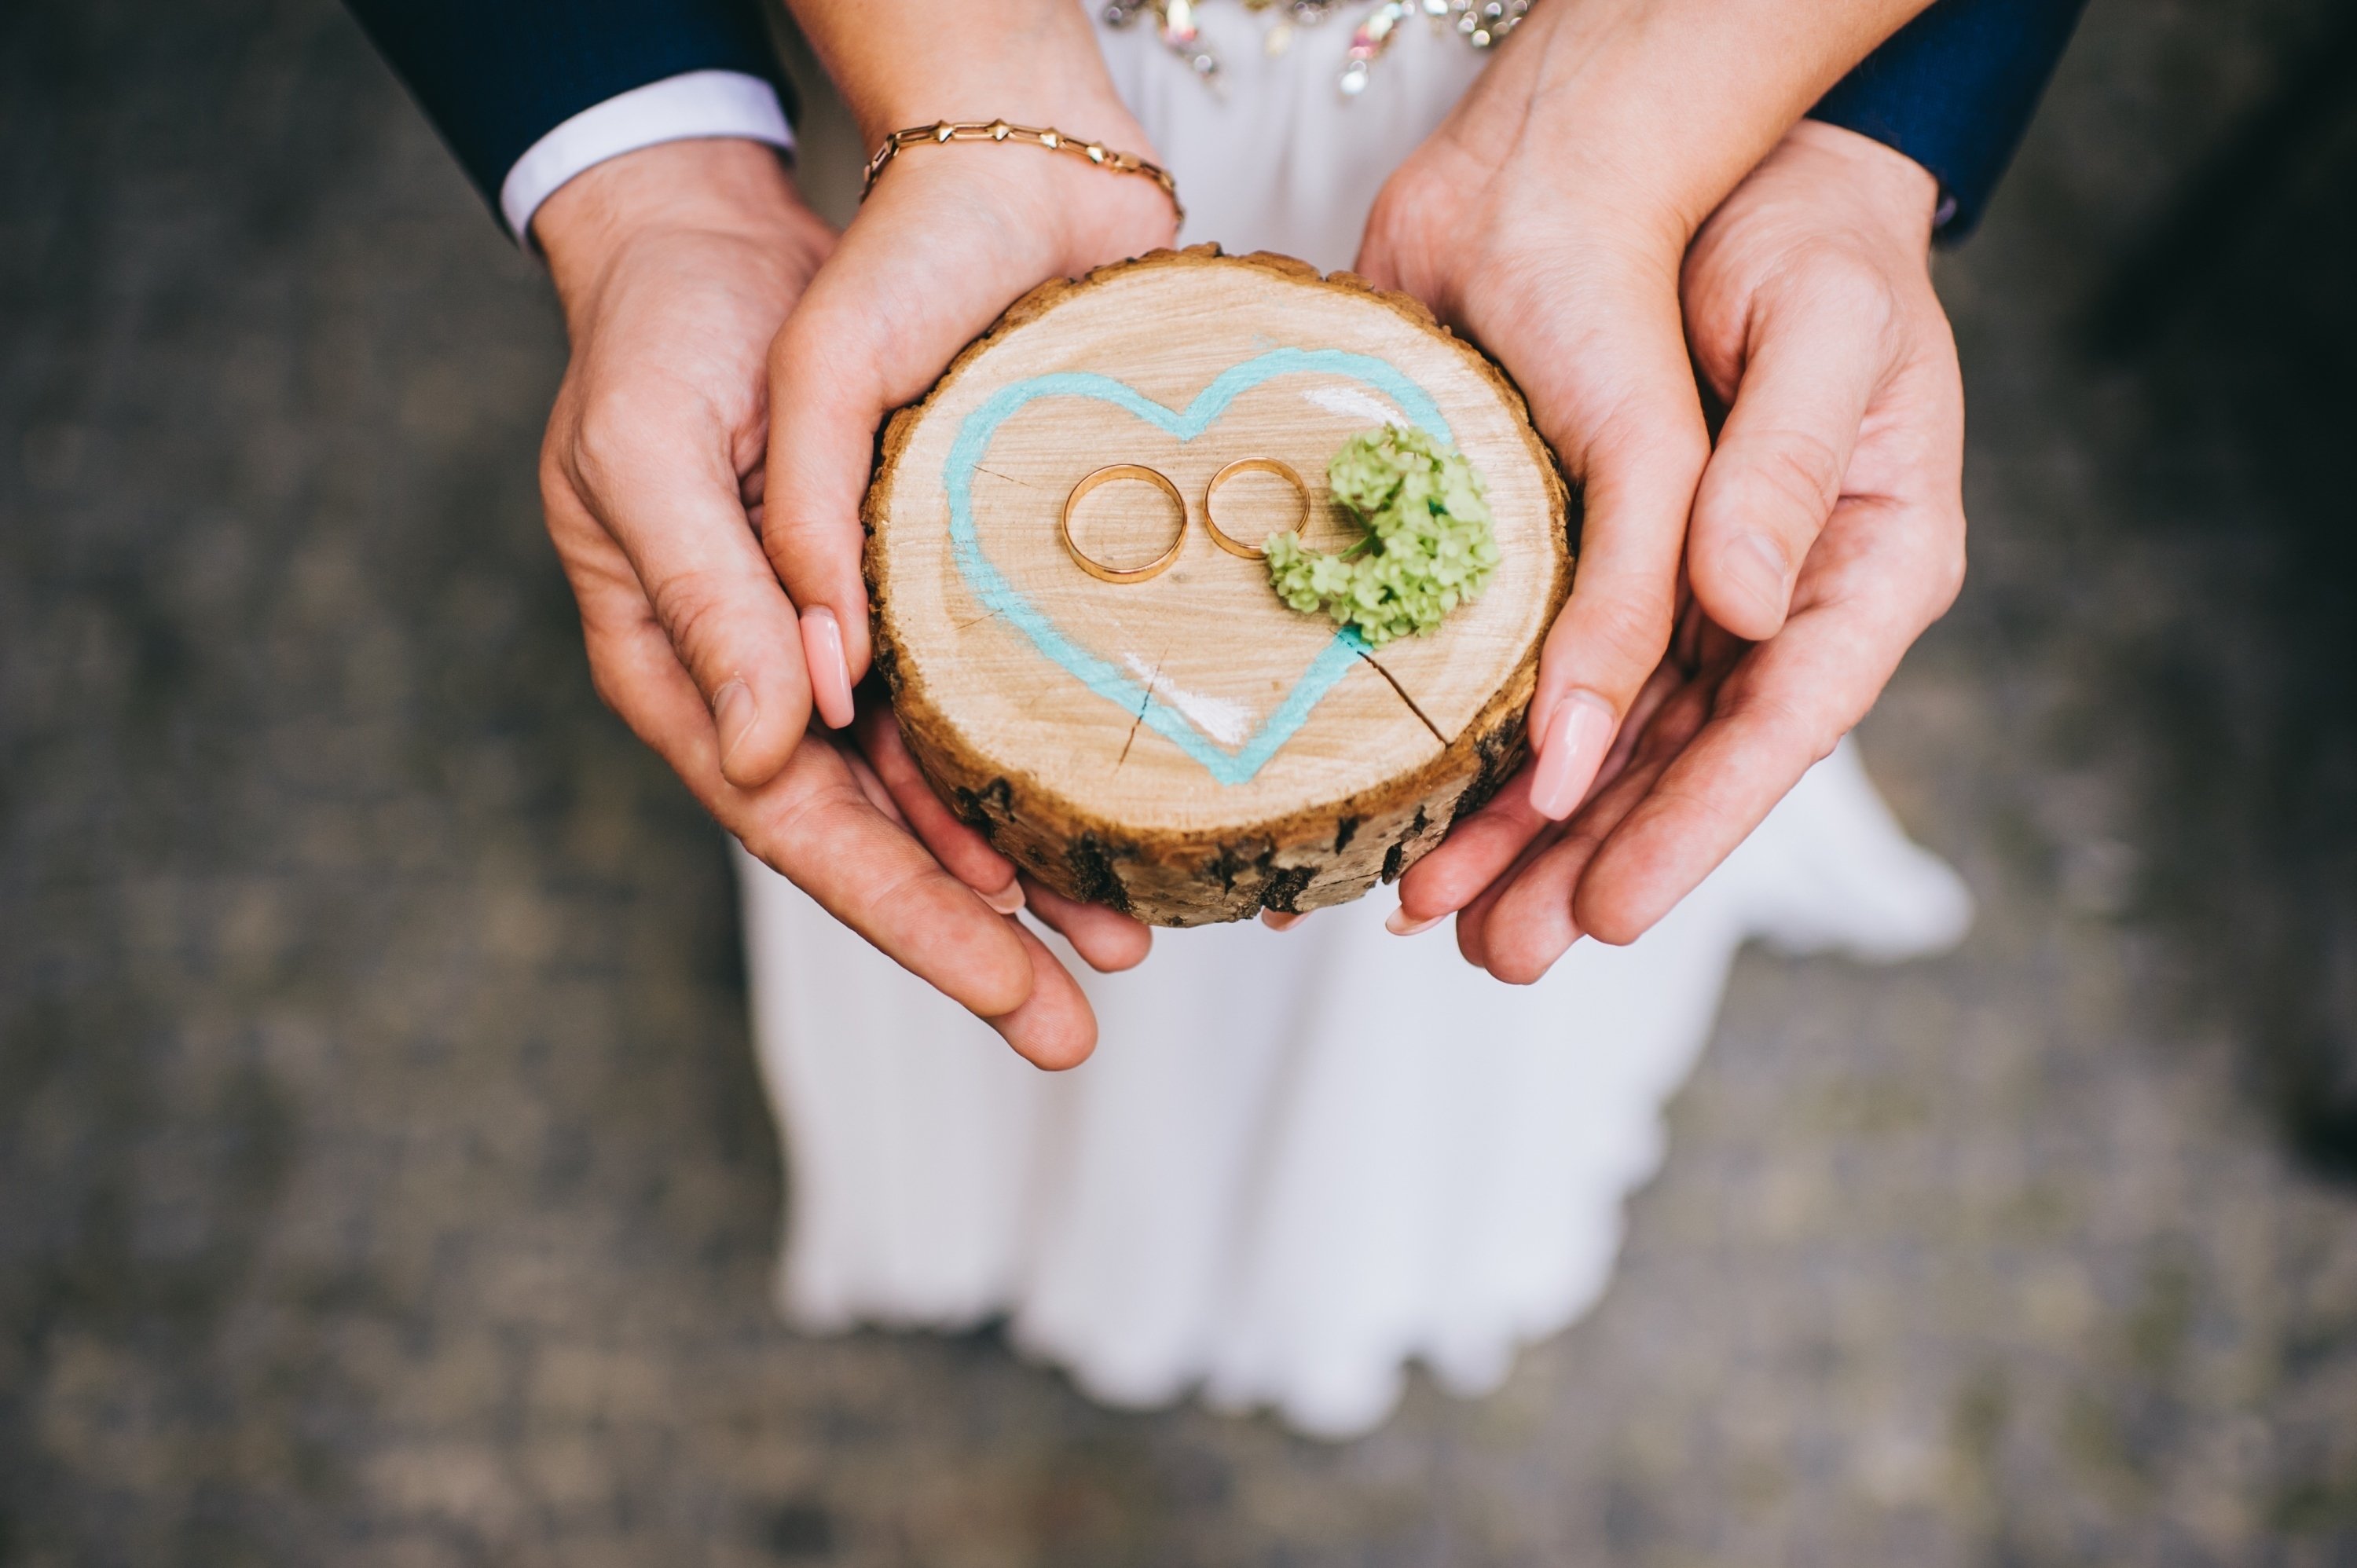 NonTraditional Wedding Photo Ideas That Use Props